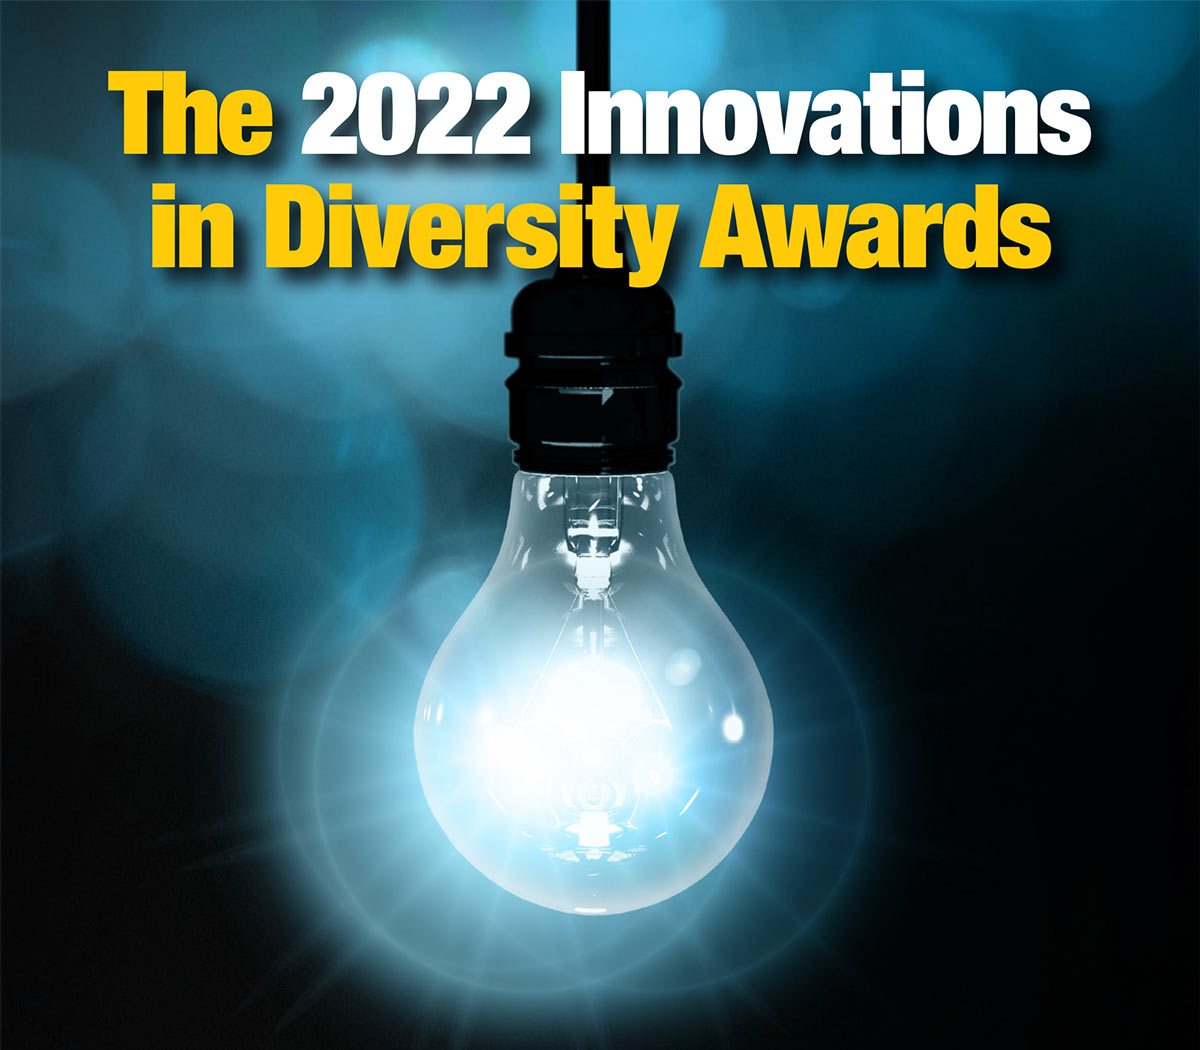 The 2022 Innovations in Diversity Awards